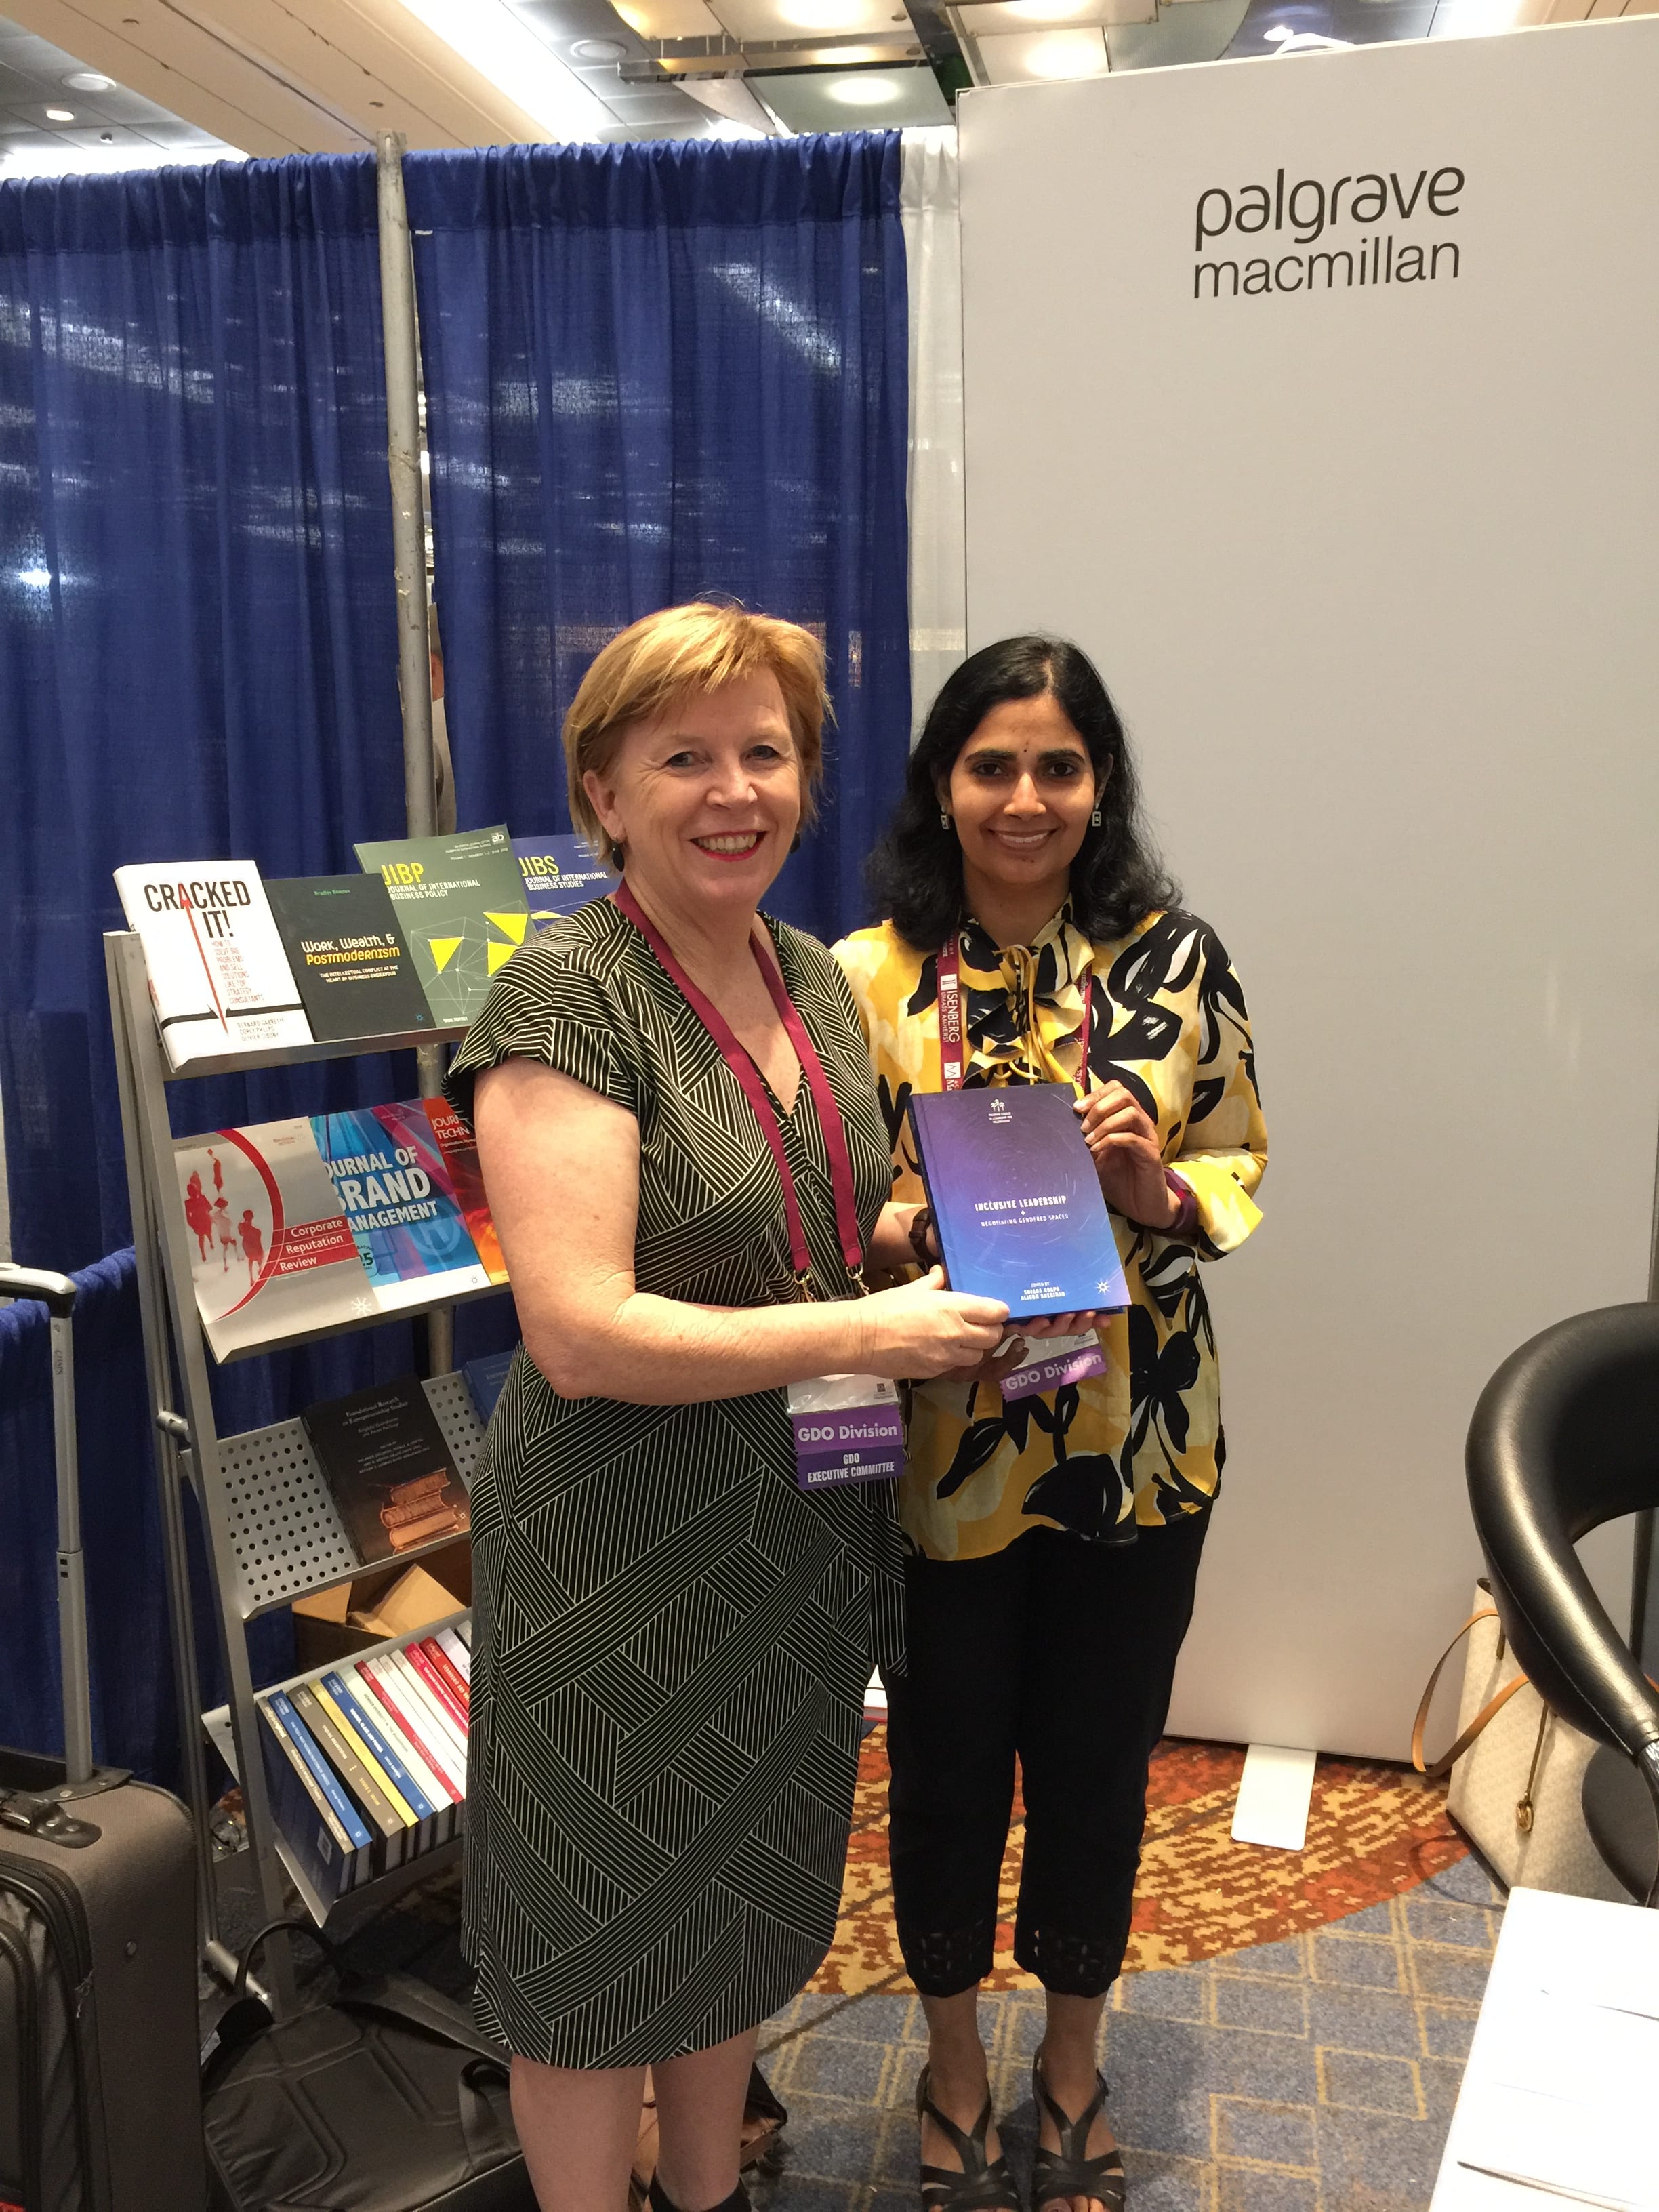 Alison and Sujana at the soft launch of their edited book, "Inclusive Leadership - Negotiated Gendered Space" for Twitter by Palgrave Macmillam Publishers, at the Academy of Management Conference